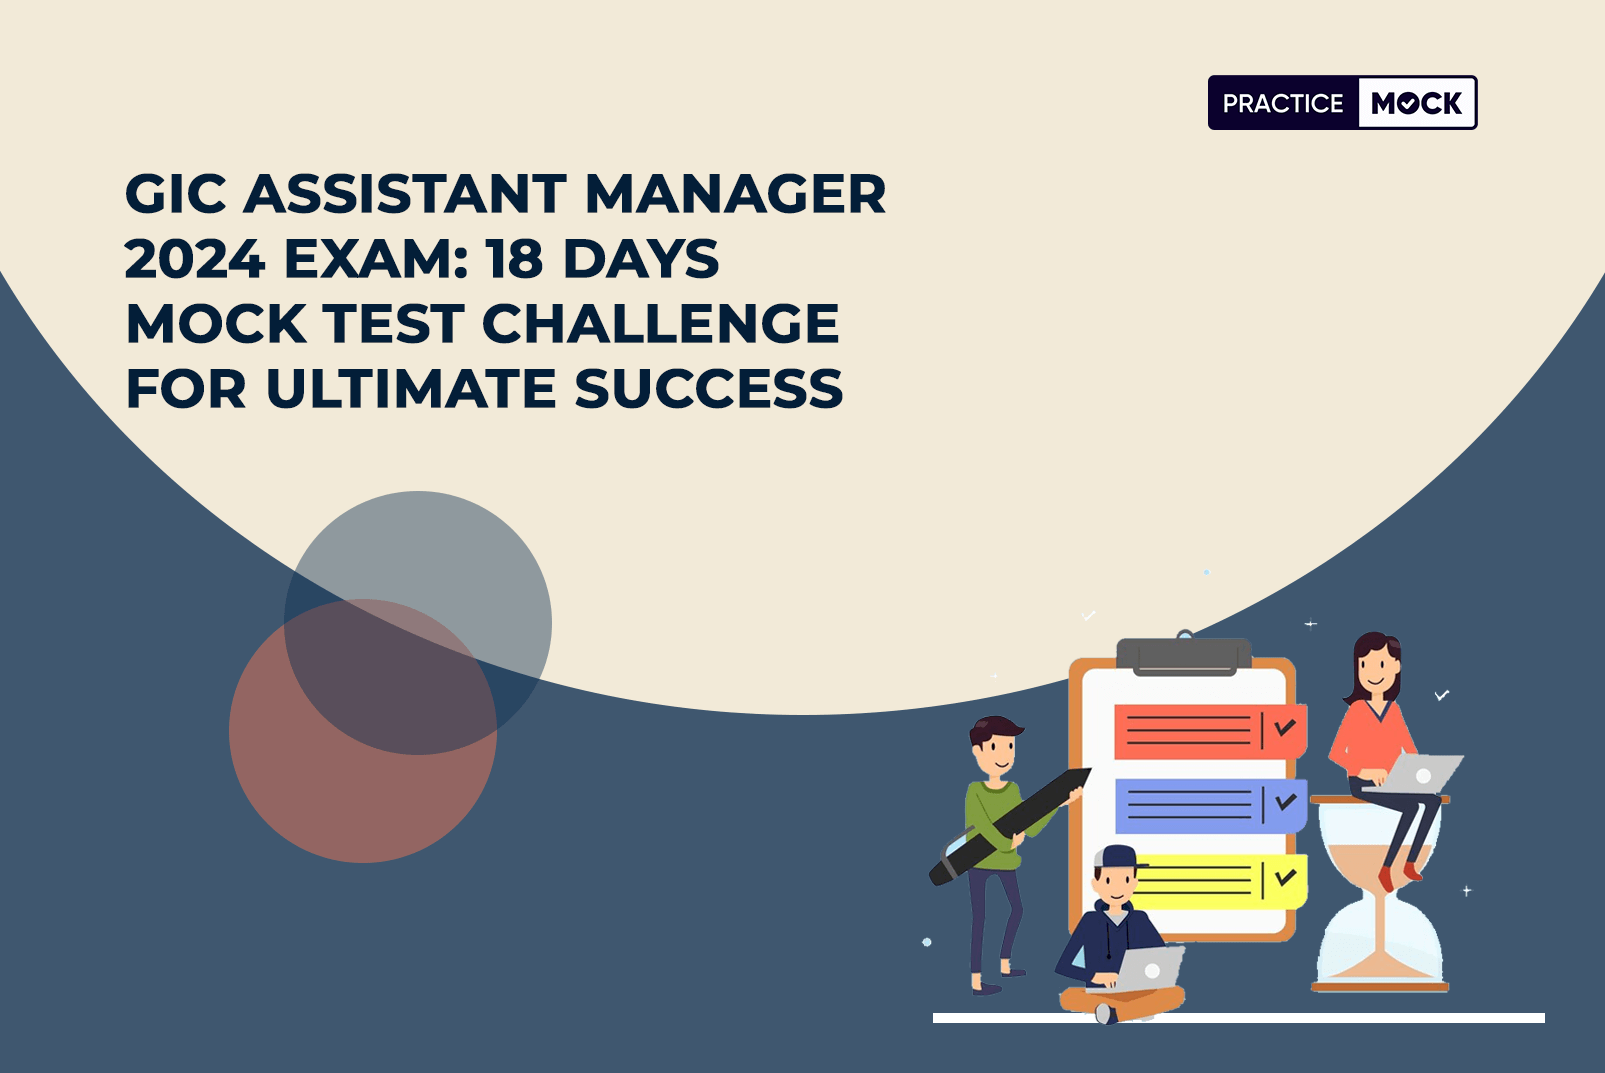 GIC Assistant Manager 2024 Exam: 18 Days Mock Test Challenge For Ultimate Success